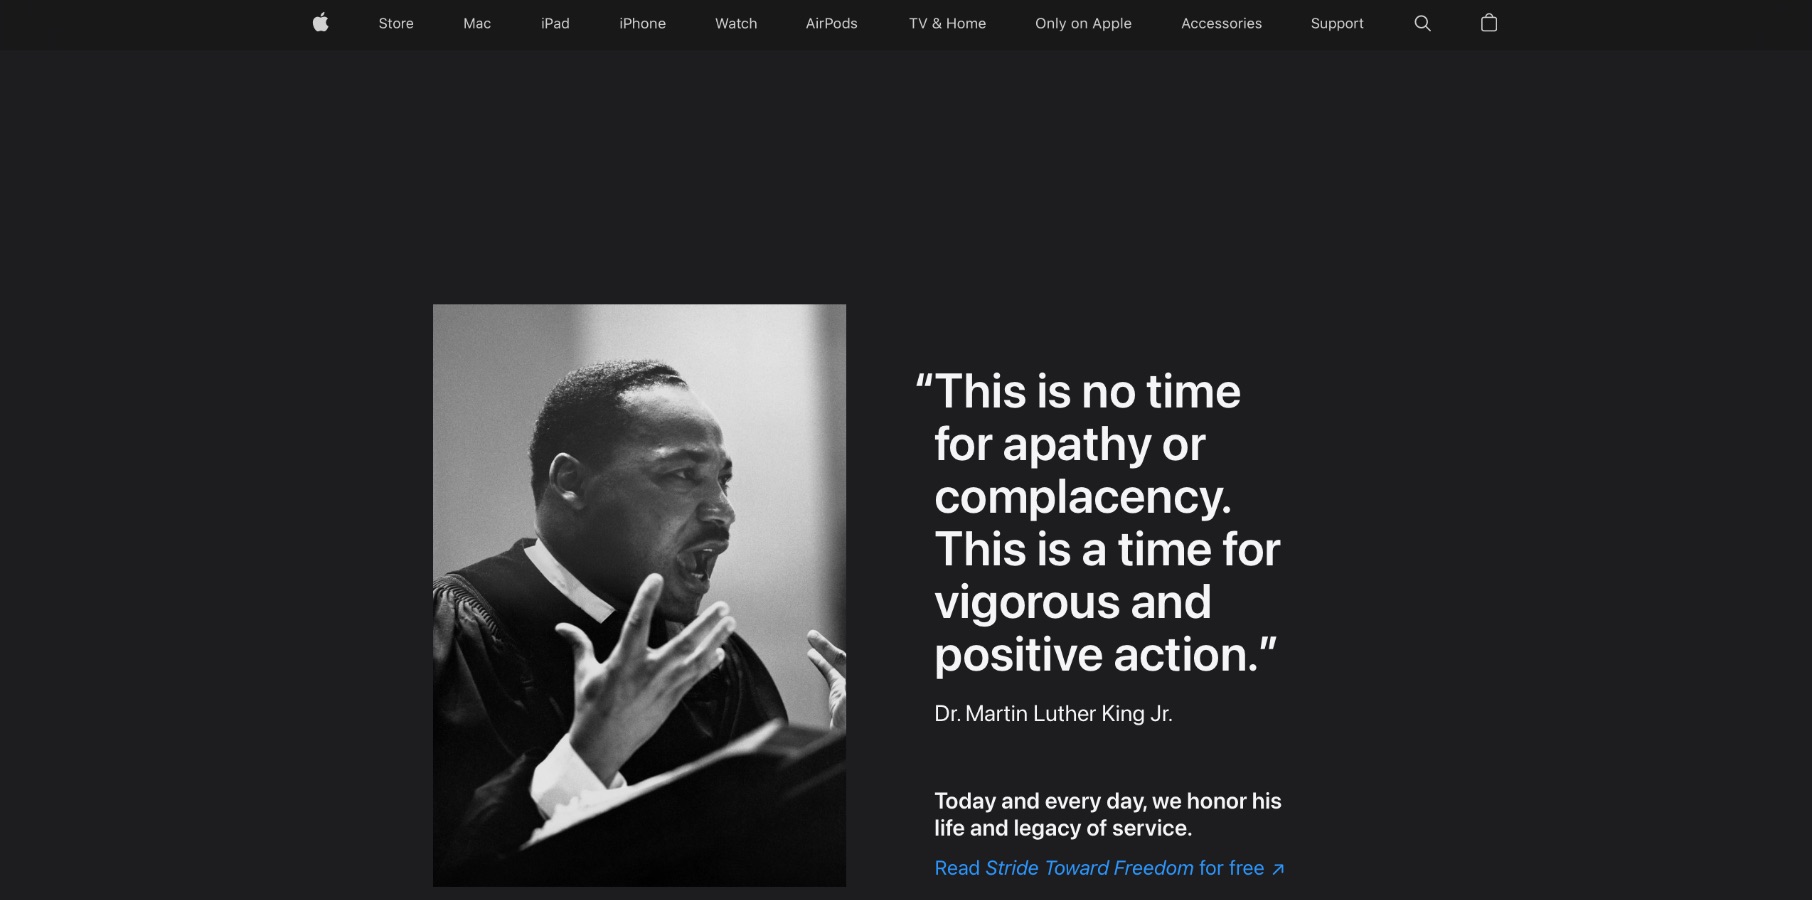 Apple celebrates Martin Luther King Jr. Day on its homepage